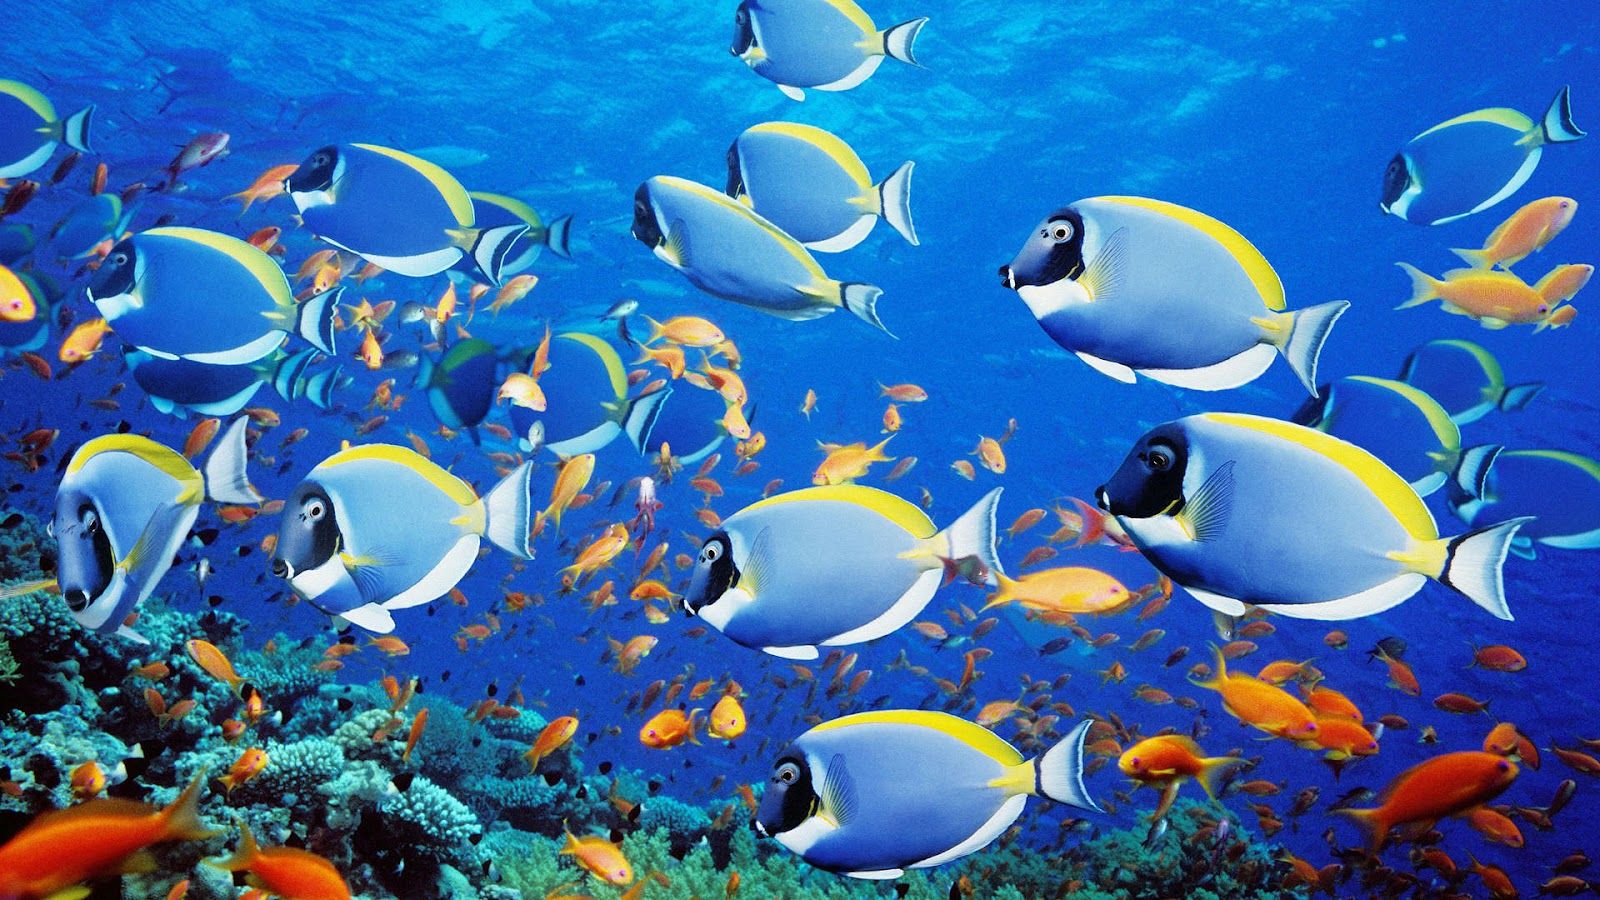 Group of tropical blue fish wallpaper | HD Animals Wallpapers